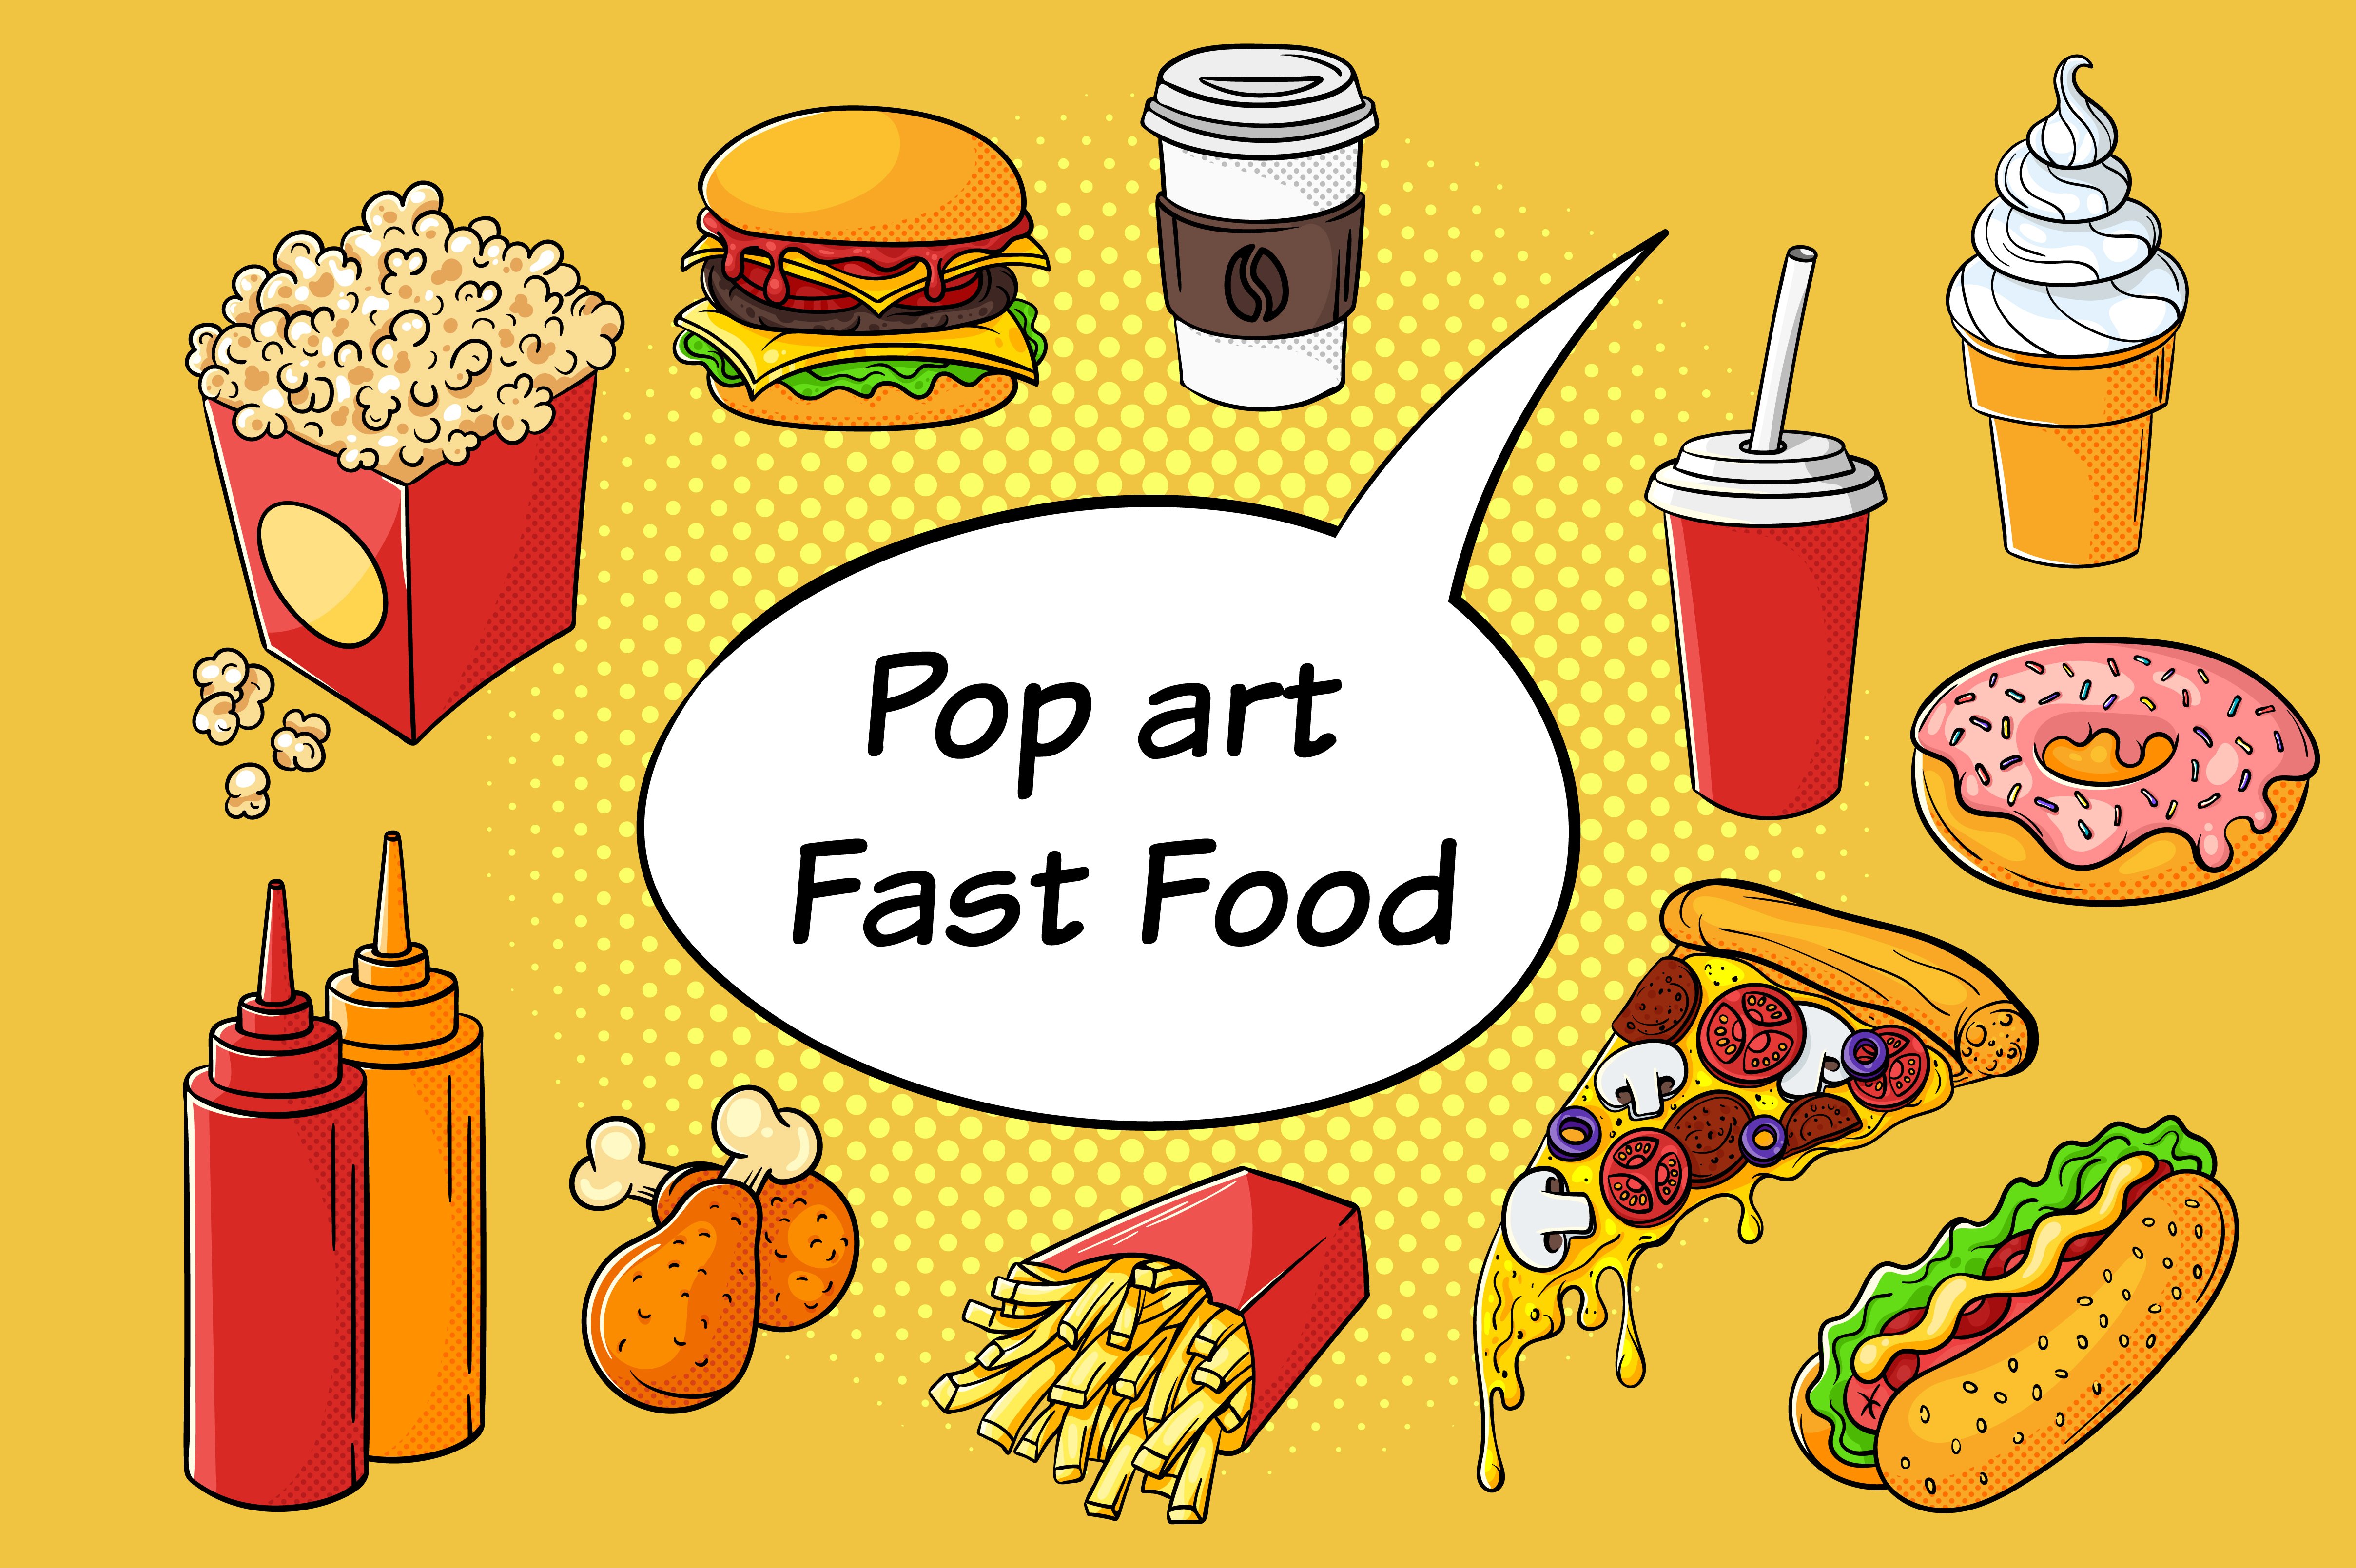 Fast food cover image.